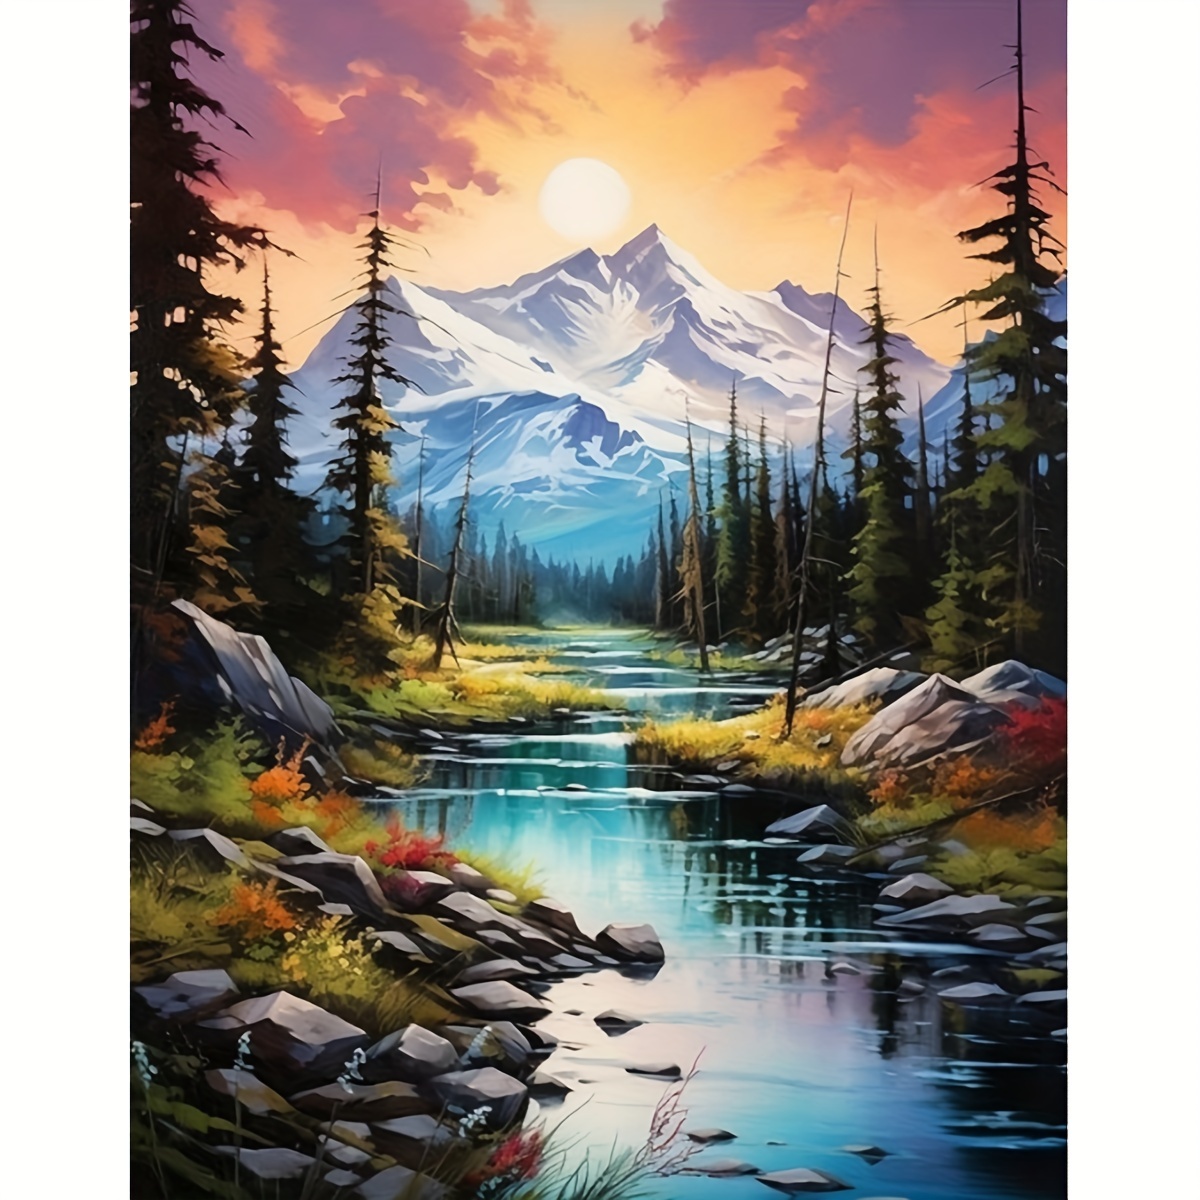 

Mountain Forest Diamond Art Painting Tools For Adults 5 D Diy Diamond Art Tools For Beginners With Round Full Drill Diamond Gems Painting Art Decor Gifts For Home Wall